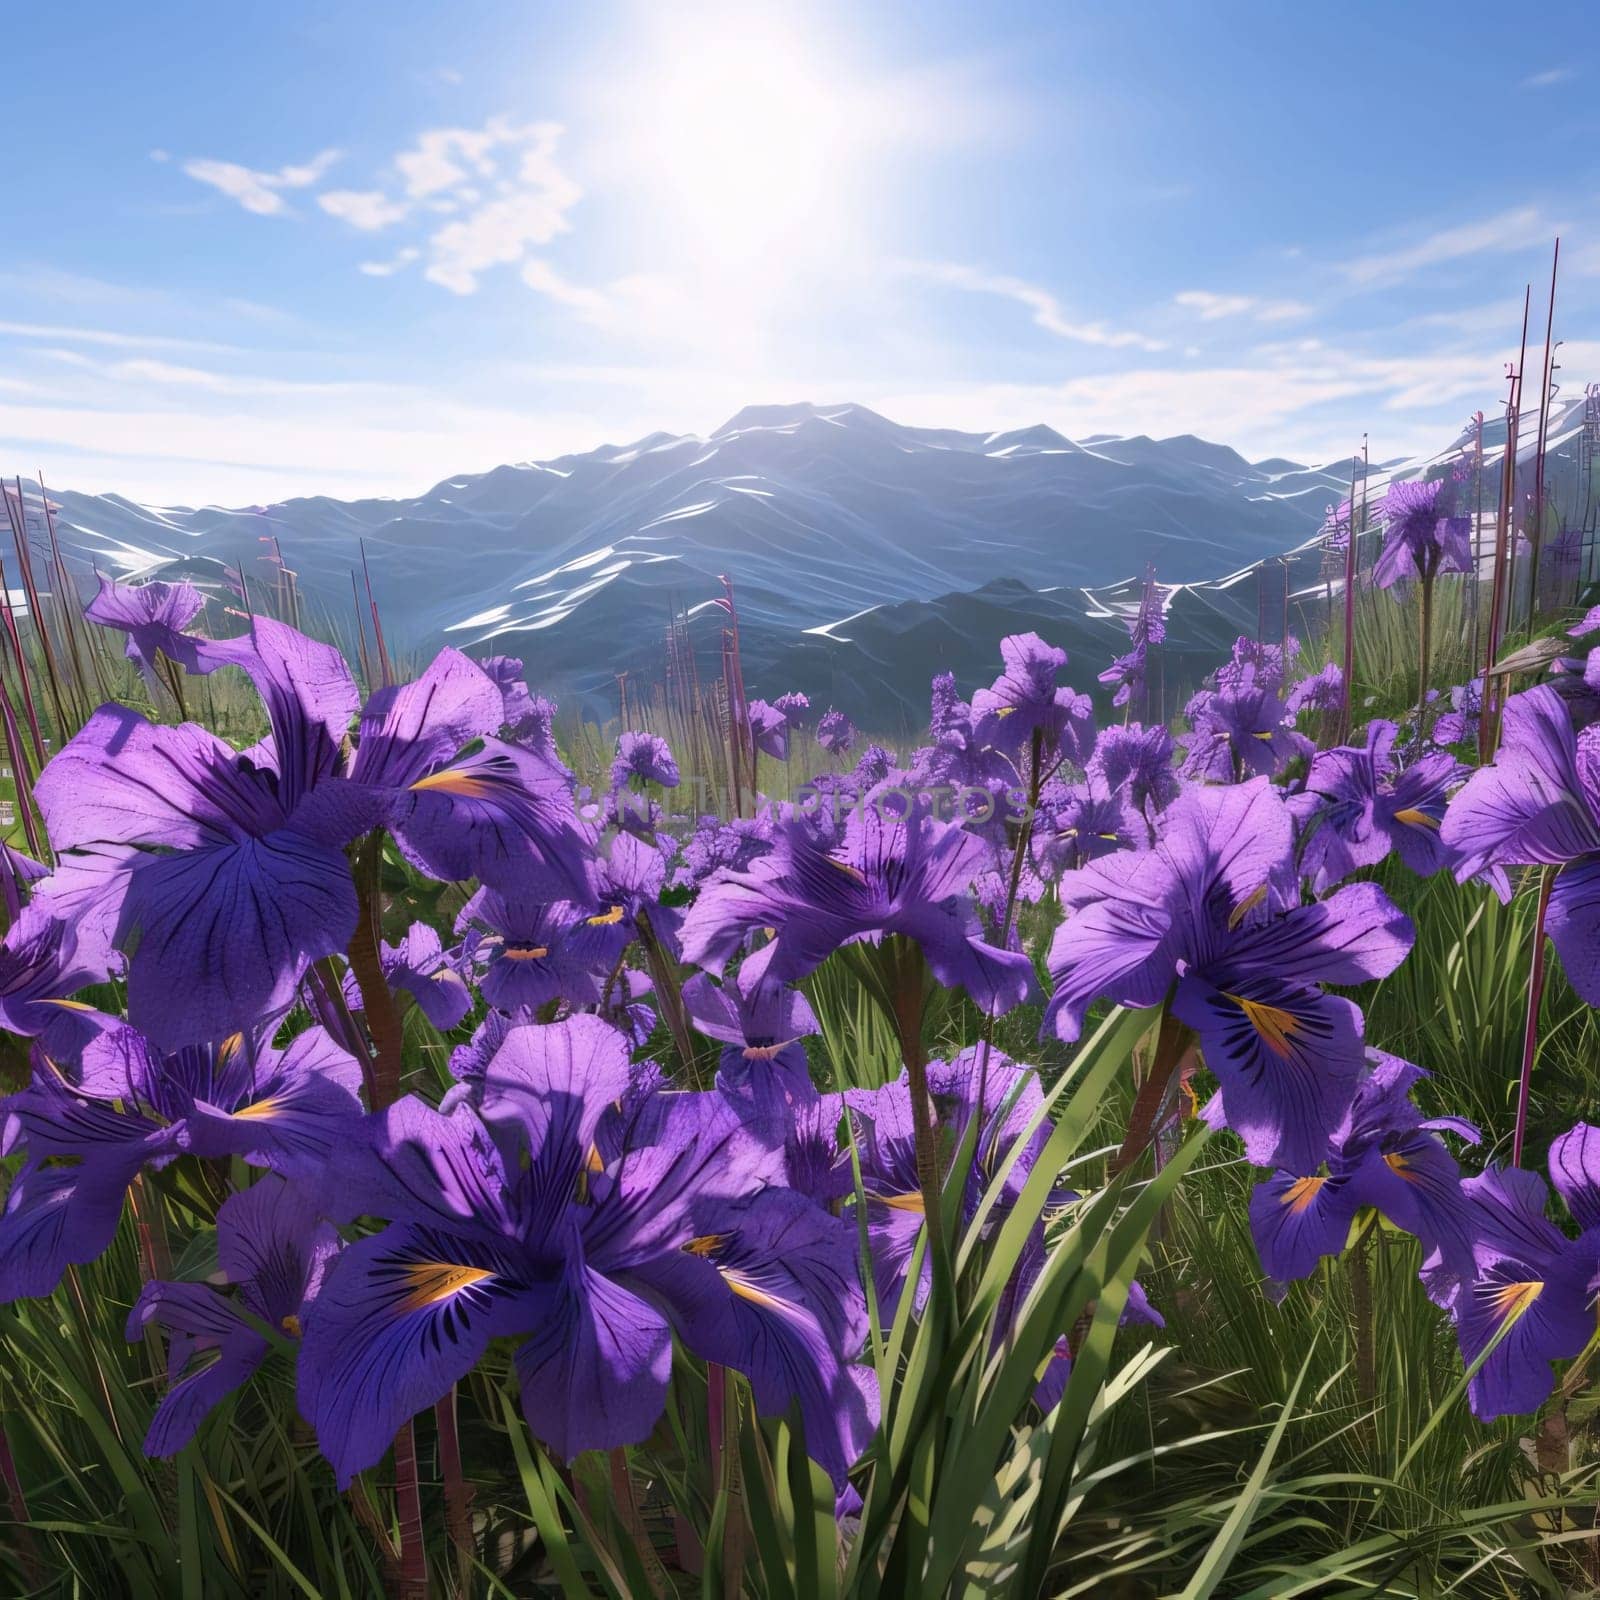 Purple flowers with Green stems kami in the meadow in the background high mountain ranges covered with snow. Flowering flowers, a symbol of spring, new life. by ThemesS